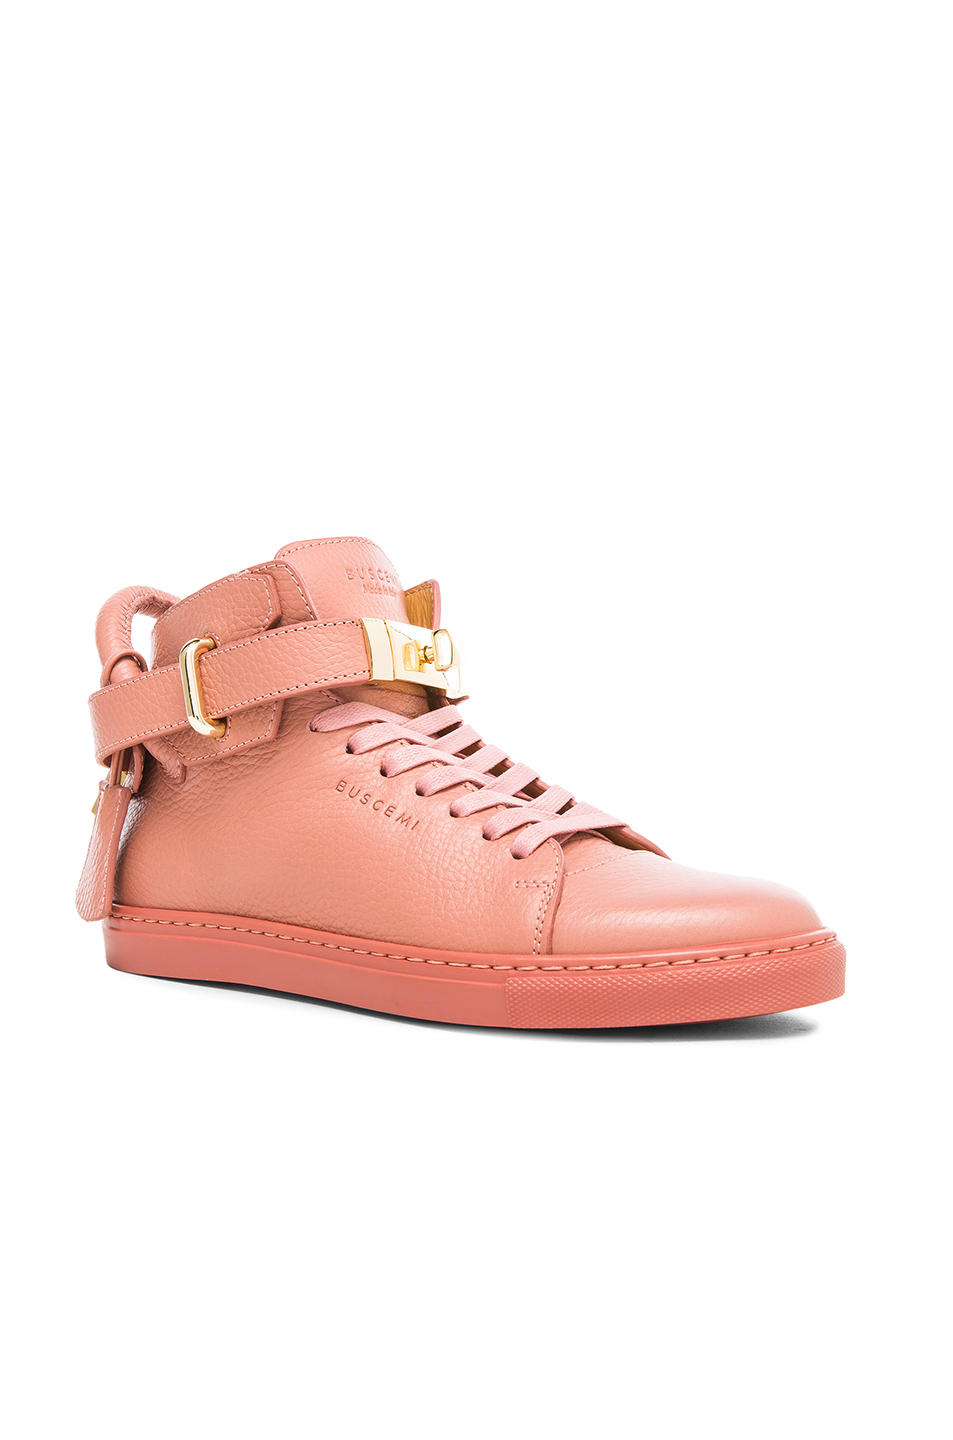 Lyst - Buscemi 100mm Leather Sneakers in Pink